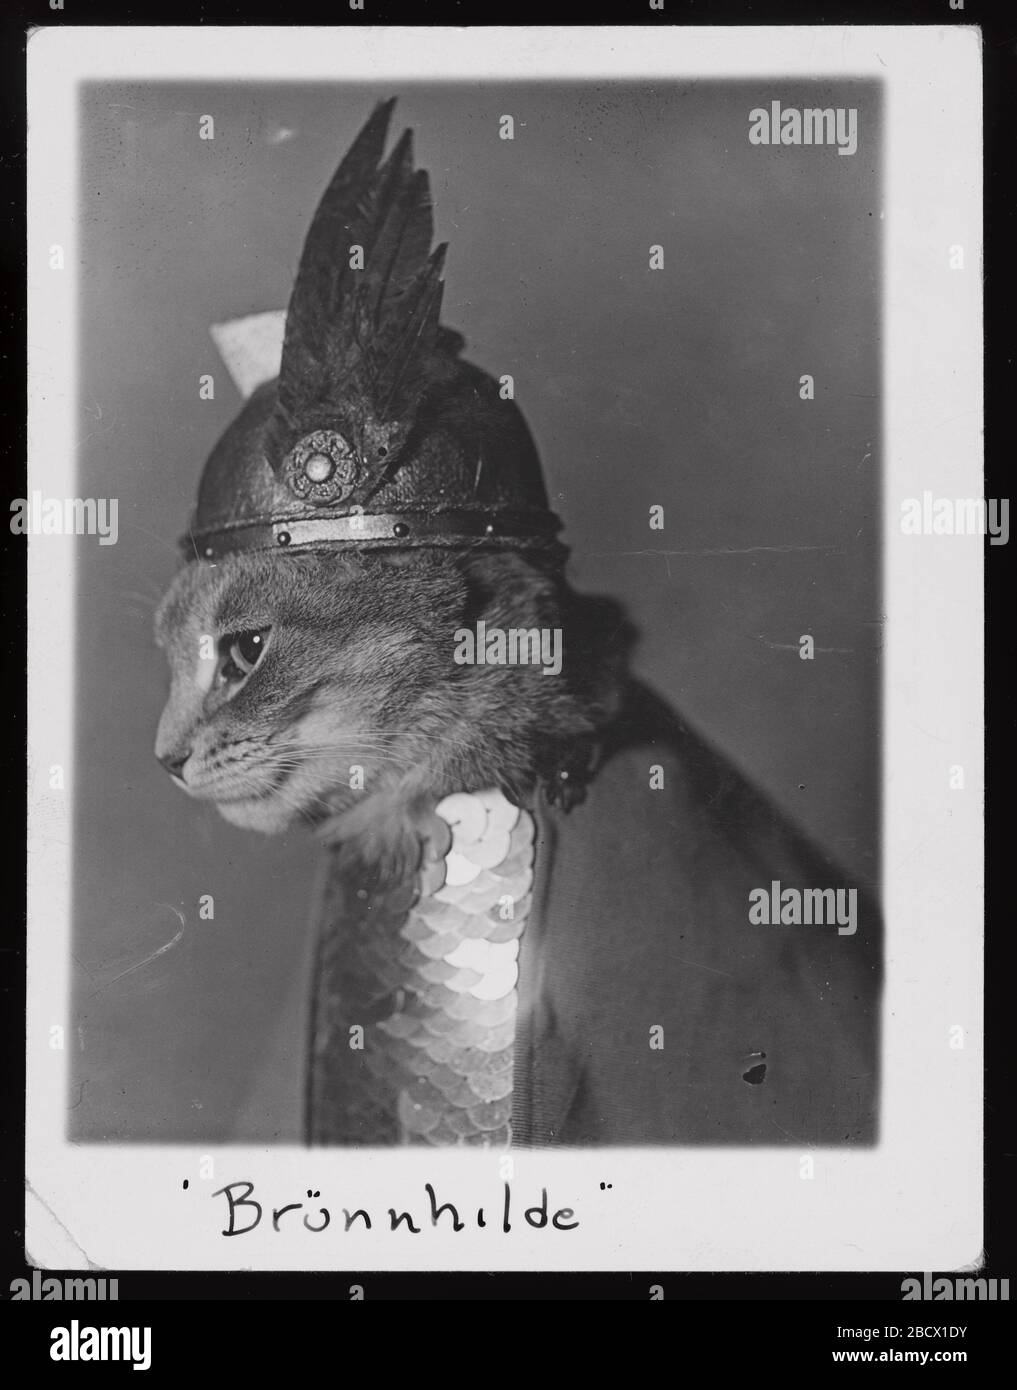 'Brünnhildelabel QS:Len,Brünnhilde; Brünnhilde  English: Brünnhilde Summary Photograph shows cat dressed in Viking helmet and shield. Subject Headings Cats--1930-1940; 12 June 1936date QS:P571,+1936-06-12T00:00:00Z/11; Source Collection Miscellaneous Items in High Demand LCCN Permalink https://lccn.loc.gov/2017645524 Flikr https://www.flickr.com/photos/library of congress/41949762921/in/datetaken/       This image  is available from the United States Library of Congress's Prints and Photographs division under the digital ID ppmsca.51533.This tag does not indicate the copyright status of the at Stock Photo